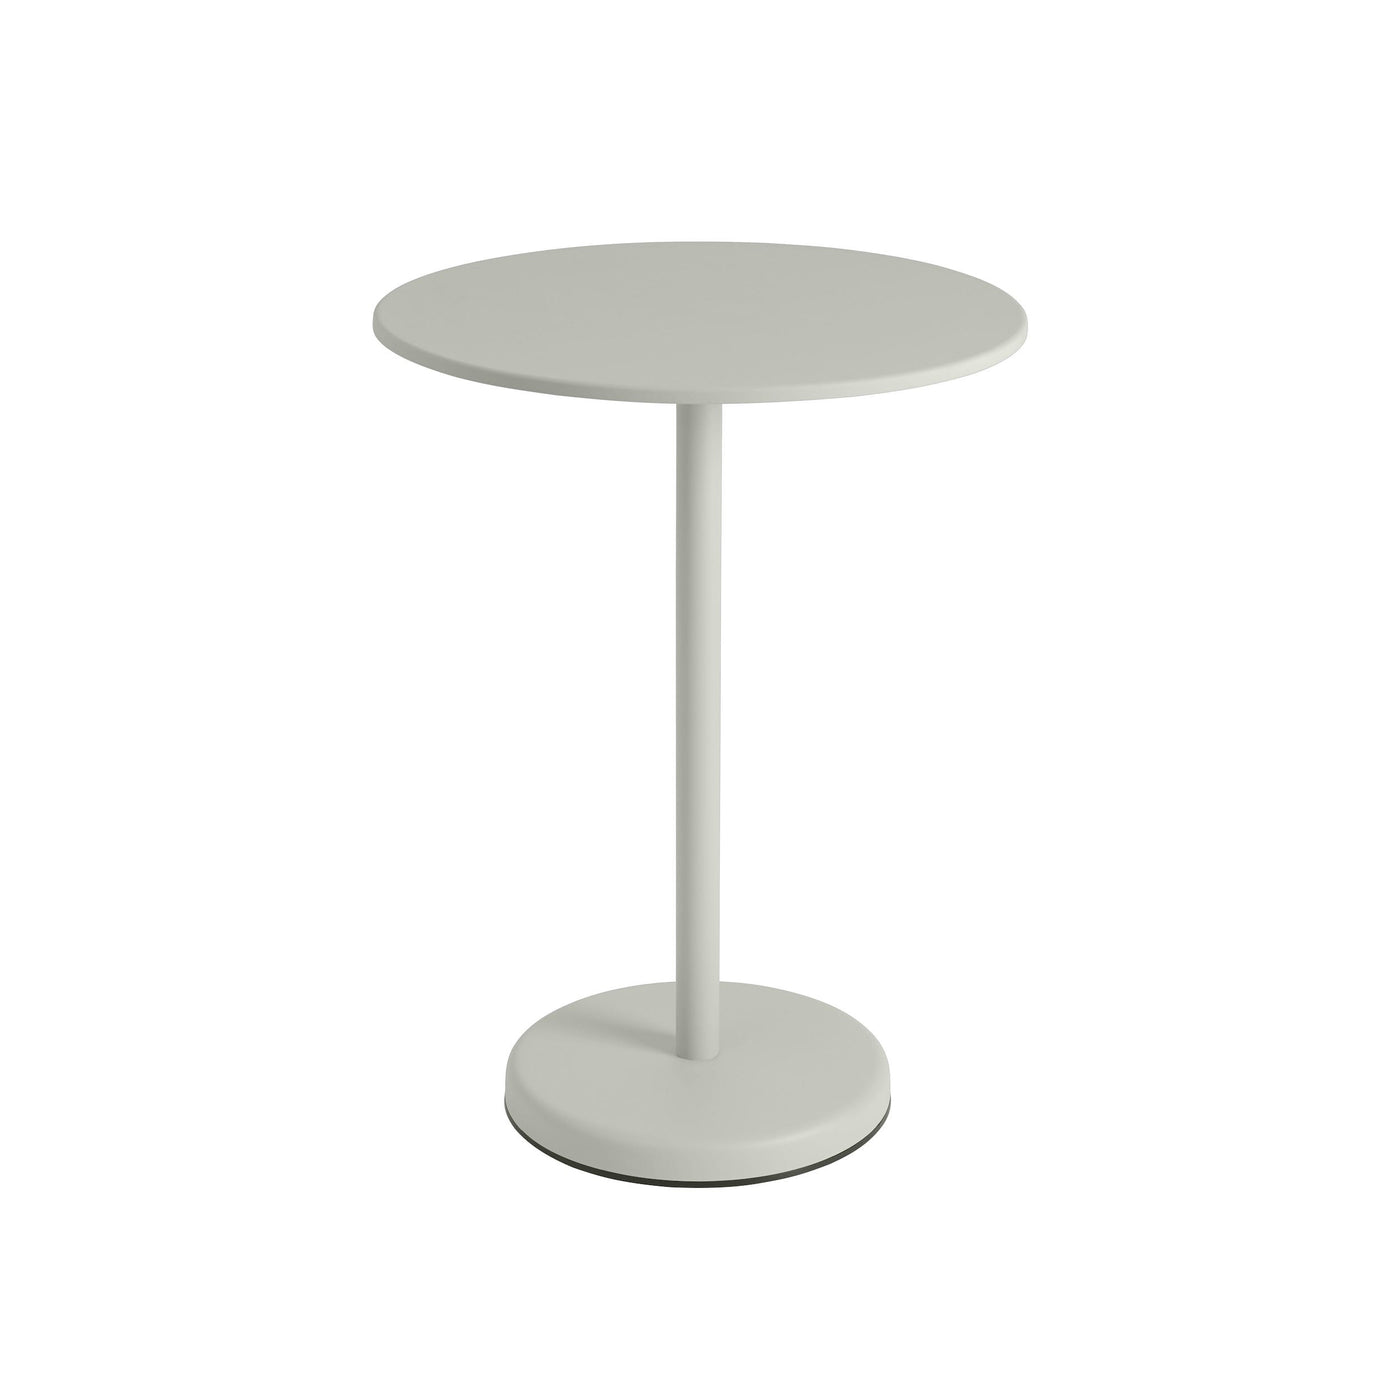 Muuto Linear Steel Cafe Table 95cm height. Shop outdoor furniture at at someday designs. #colour_grey